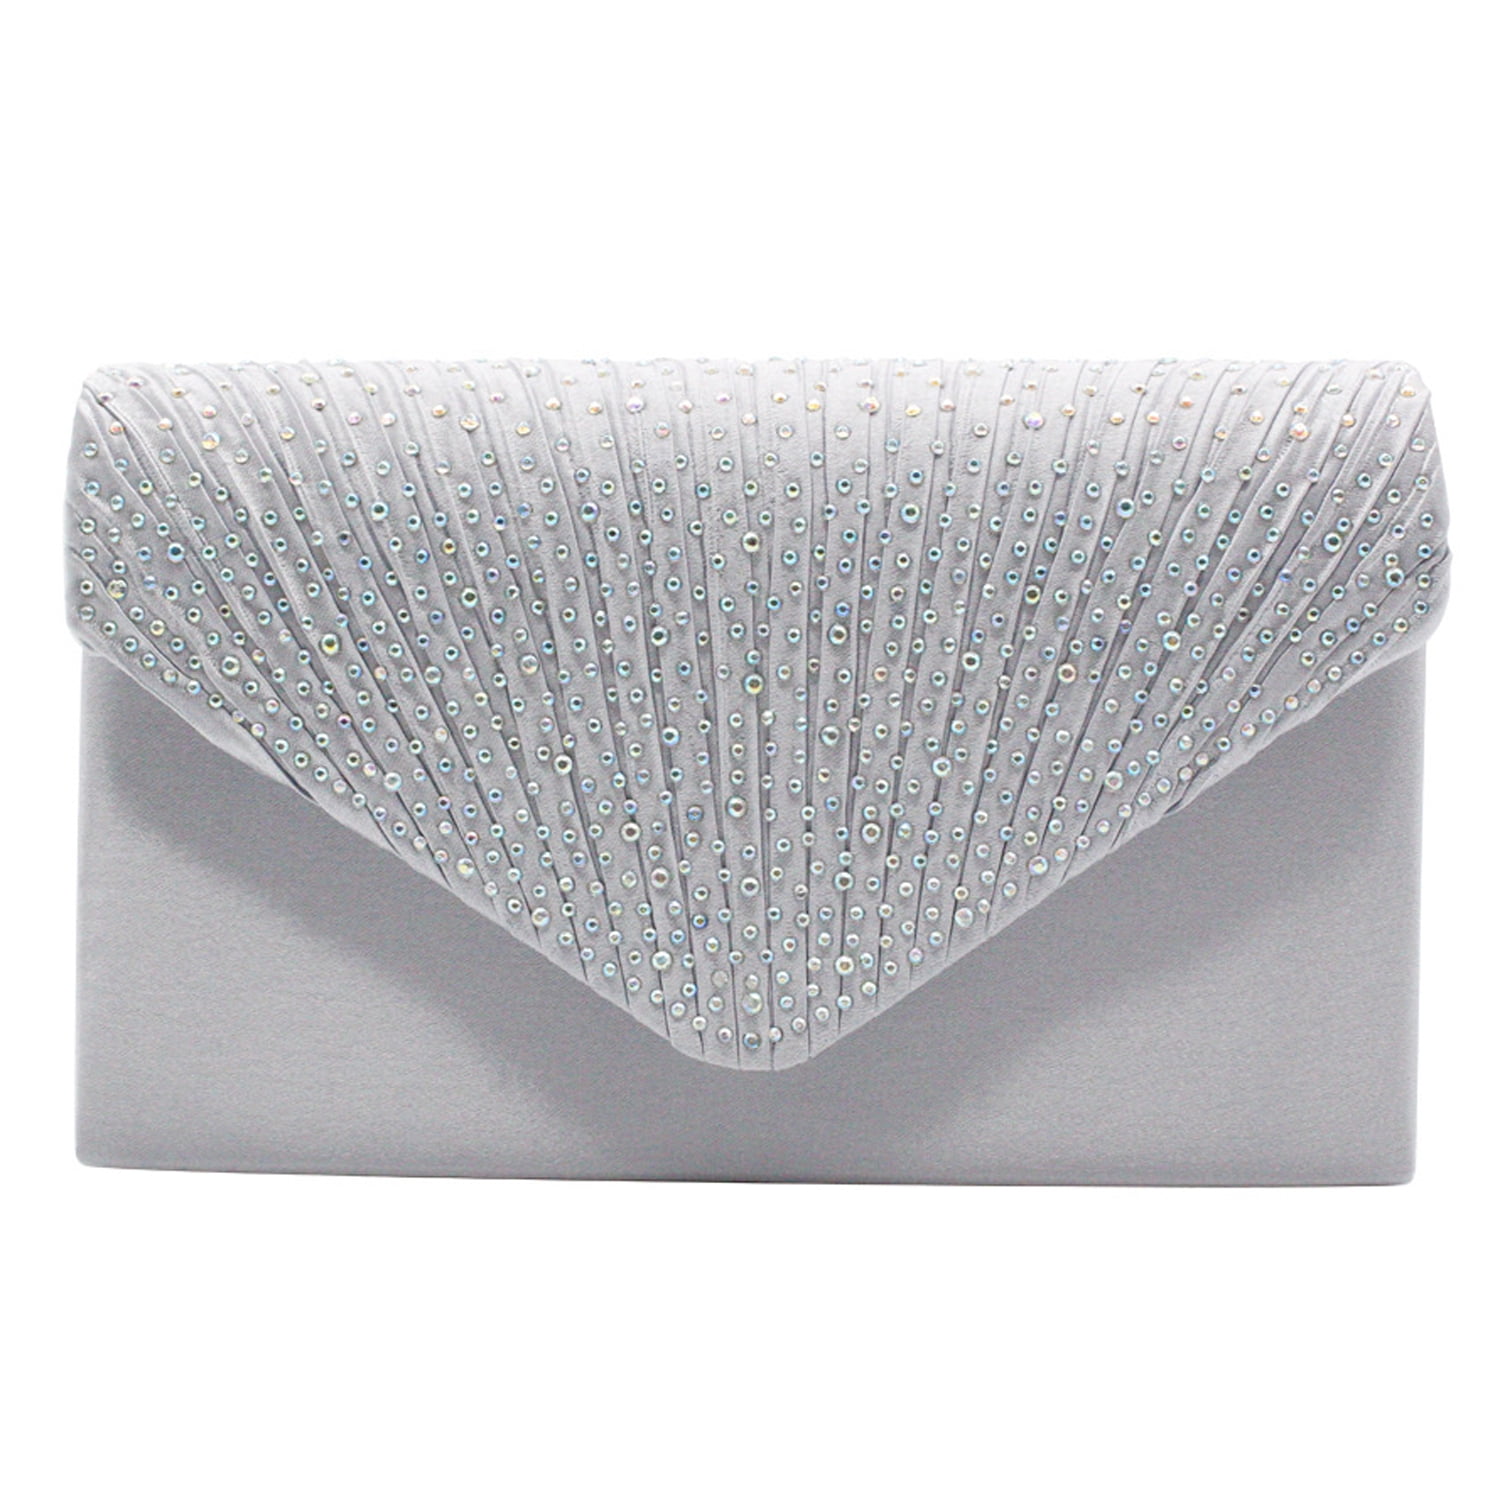 ELEOPTION Women Ladies' Triangle Bling Glitter Purse For Girls Crown Box Clutch  Evening Luxury Bags for Party Prom (silver) by Eleoption : Amazon.in:  Fashion